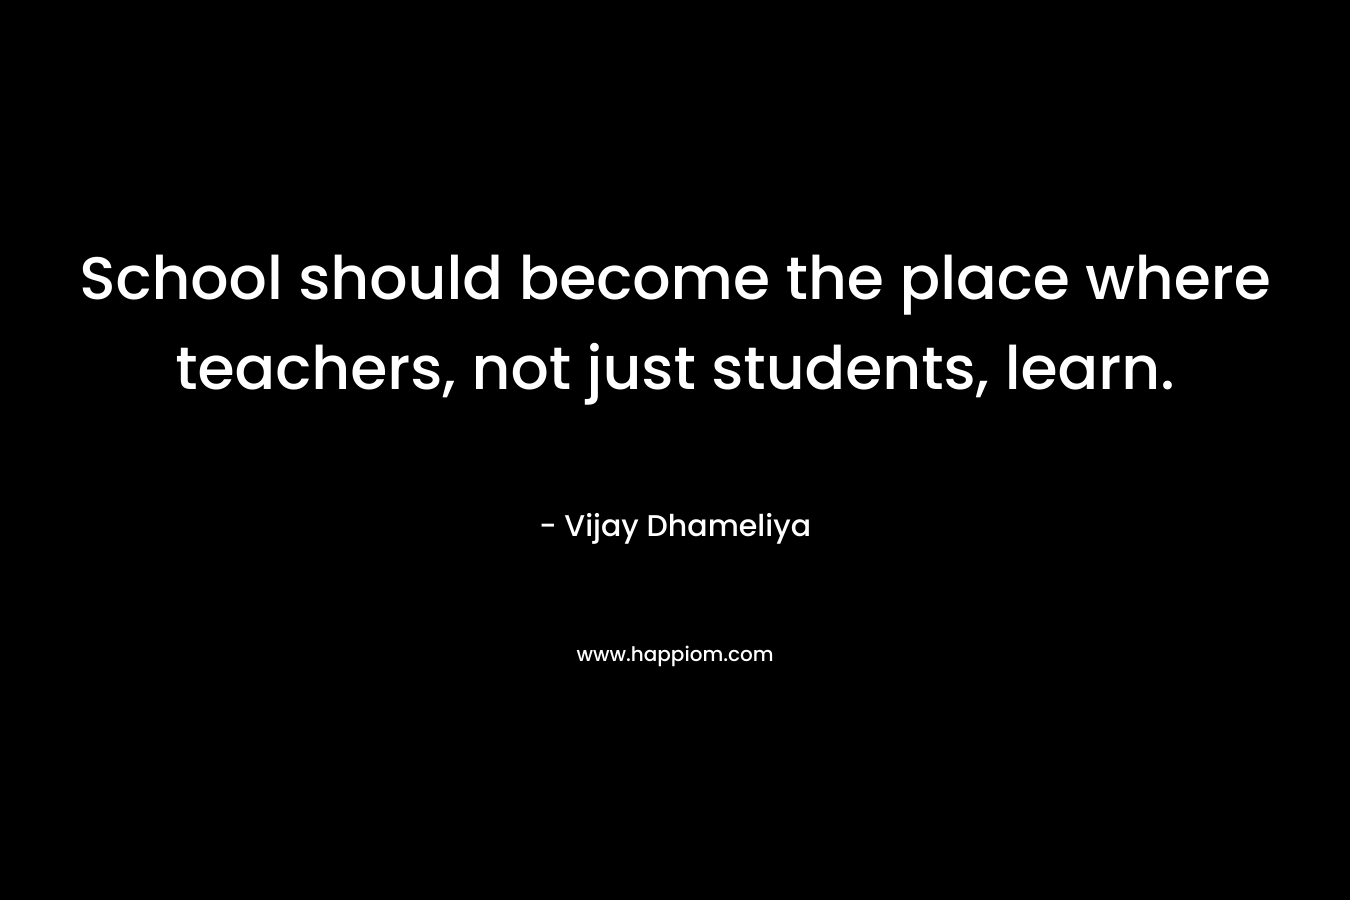 School should become the place where teachers, not just students, learn. – Vijay Dhameliya